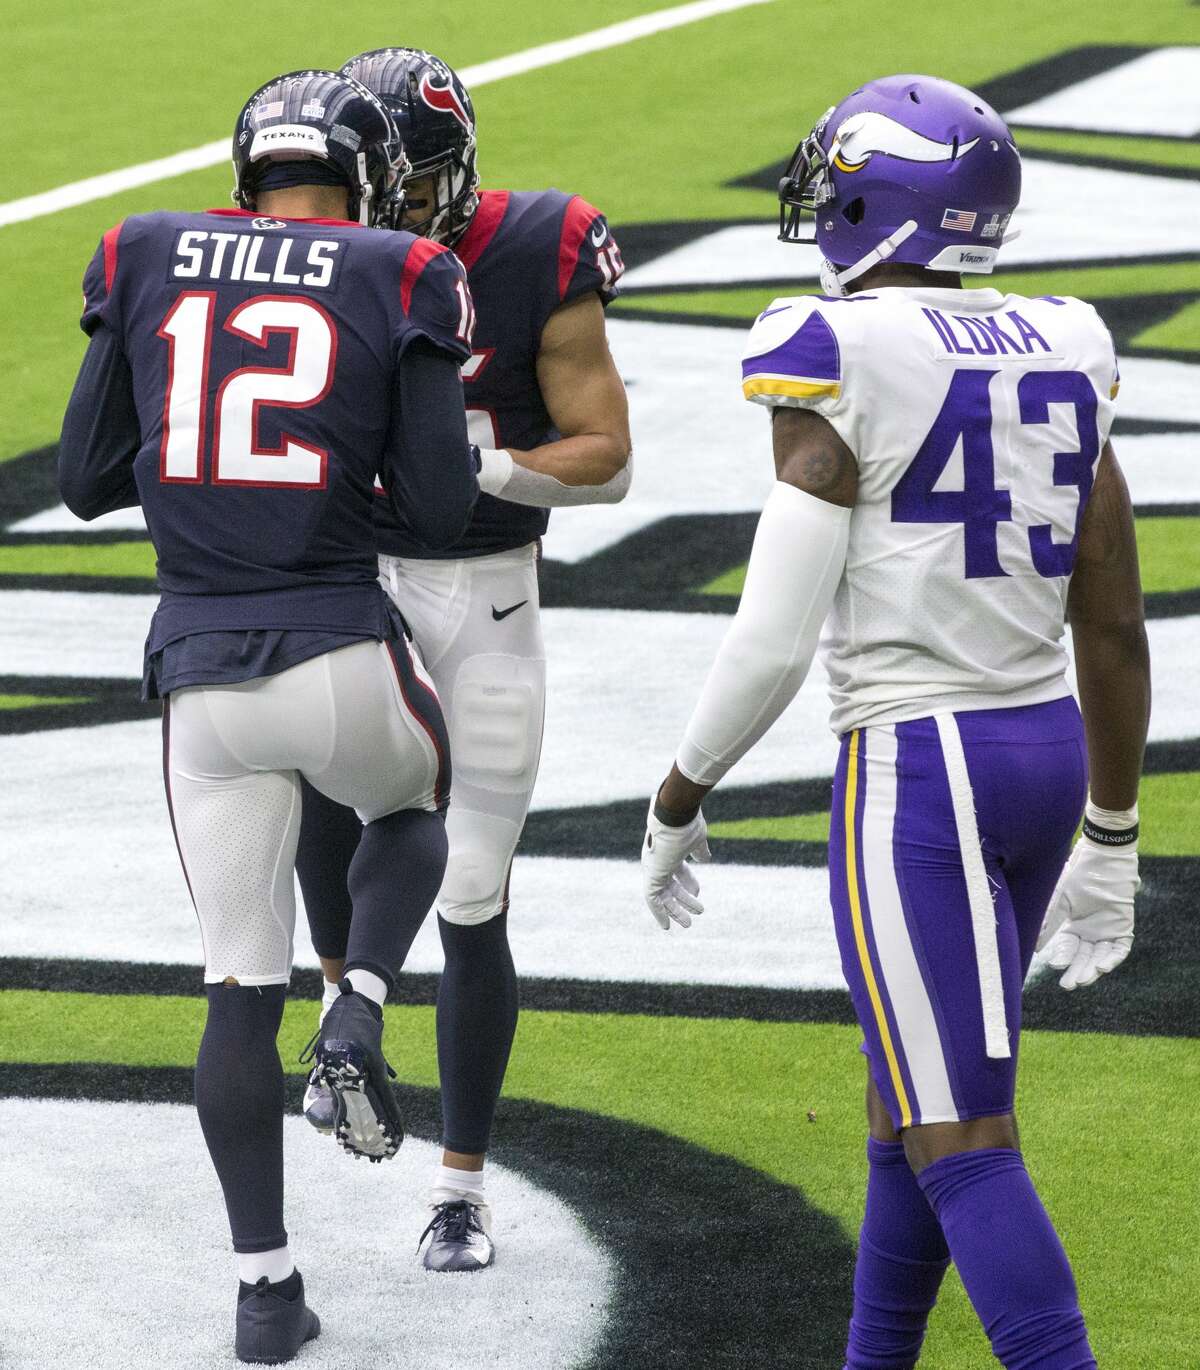 Houston Texans wide receivers Kenny Stills (12) and Will Fuller (15) celebrate Stills' 24-yard touchdown reception during the fourth quarter of an NFL football game at NRG Stadium on Sunday, Oct. 4, 2020, in Houston.